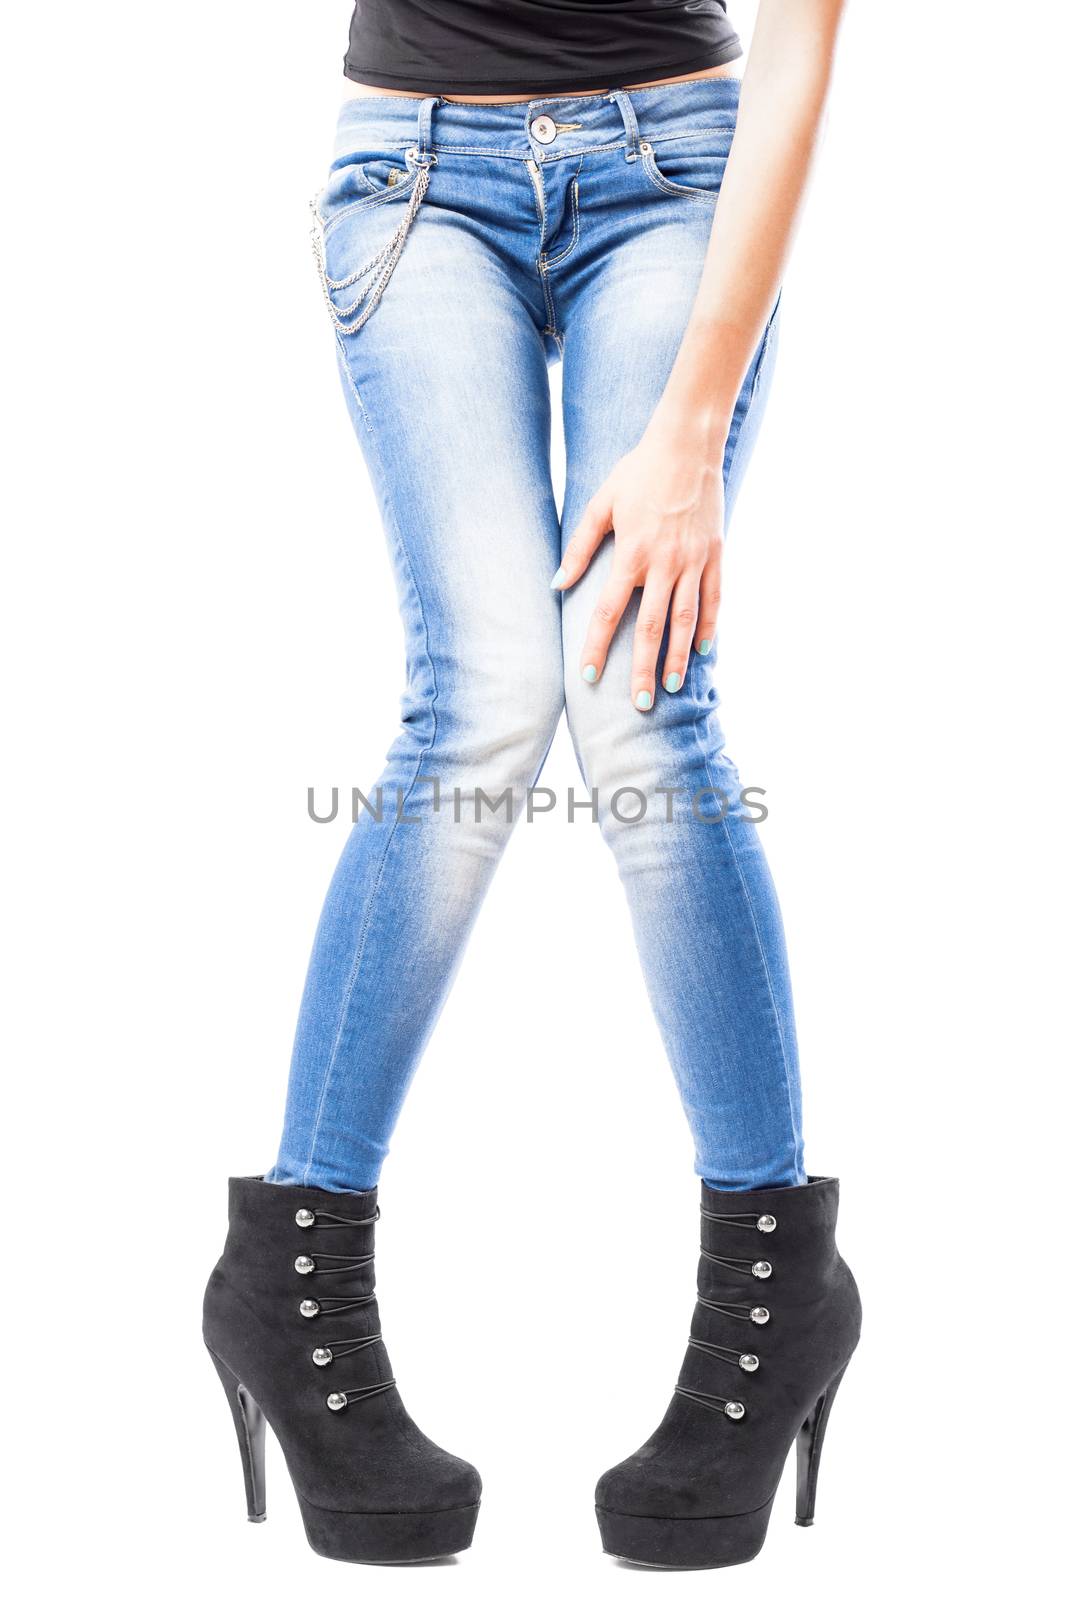 female hand and legs in jeans and high heels by kokimk